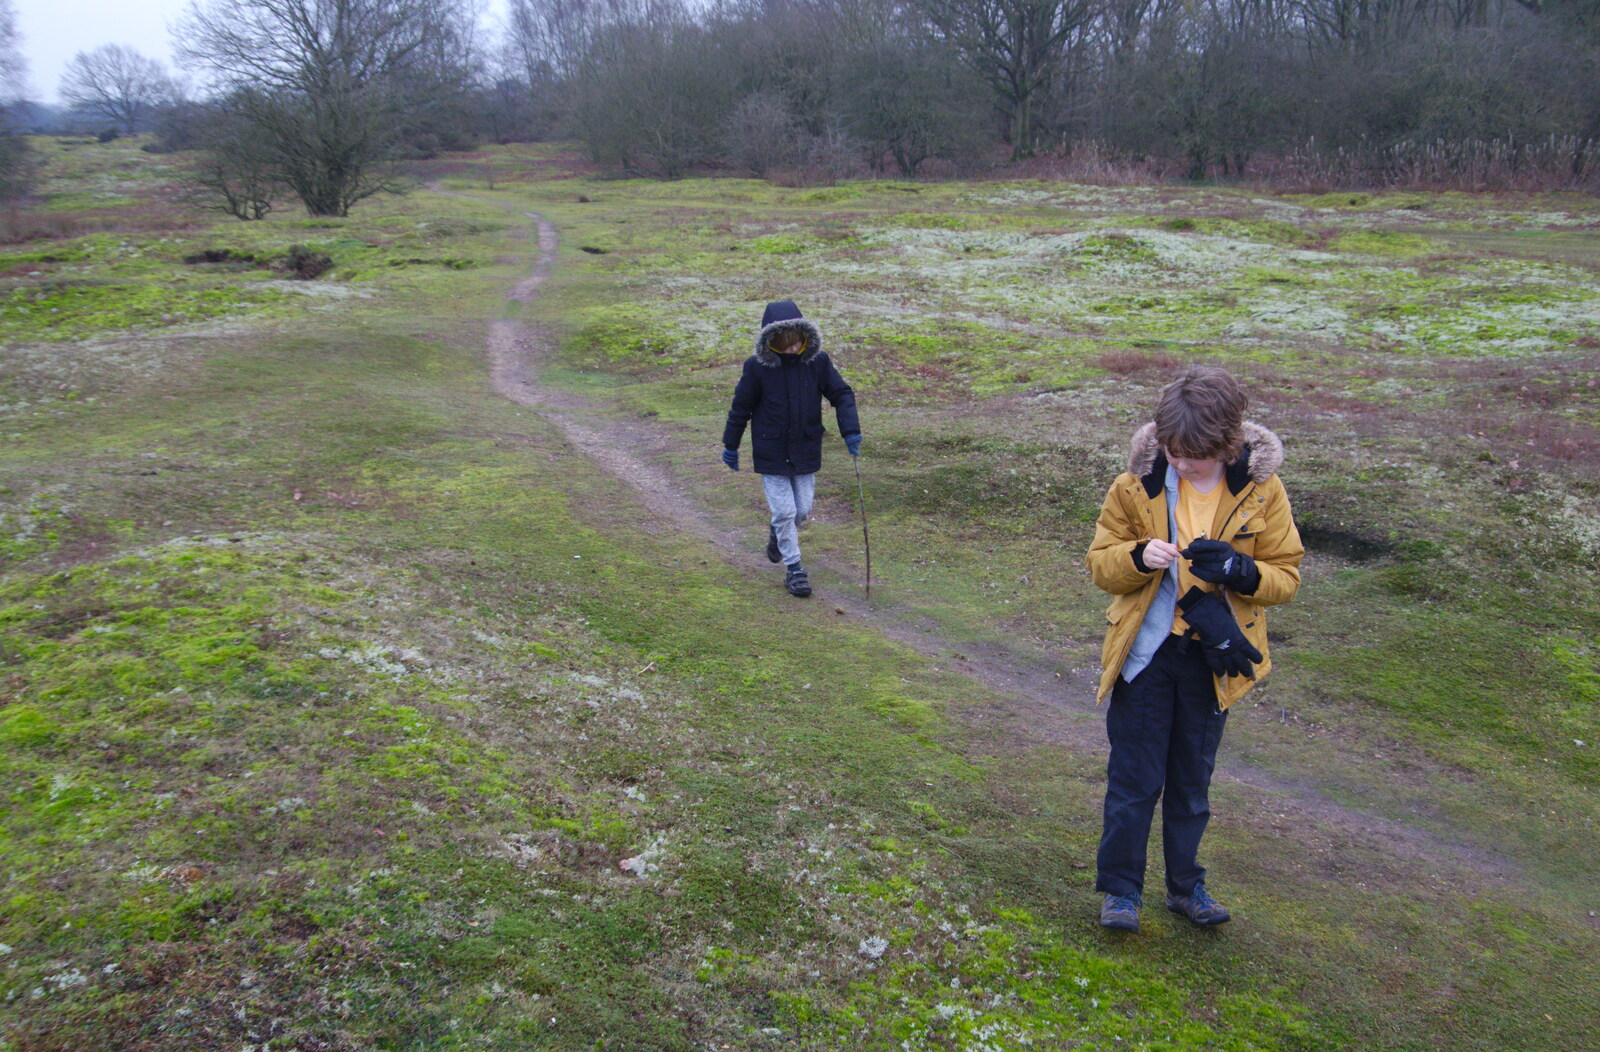 Harry and Fred from New Year's Day on the Ling, Wortham, Suffolk - 1st January 2020